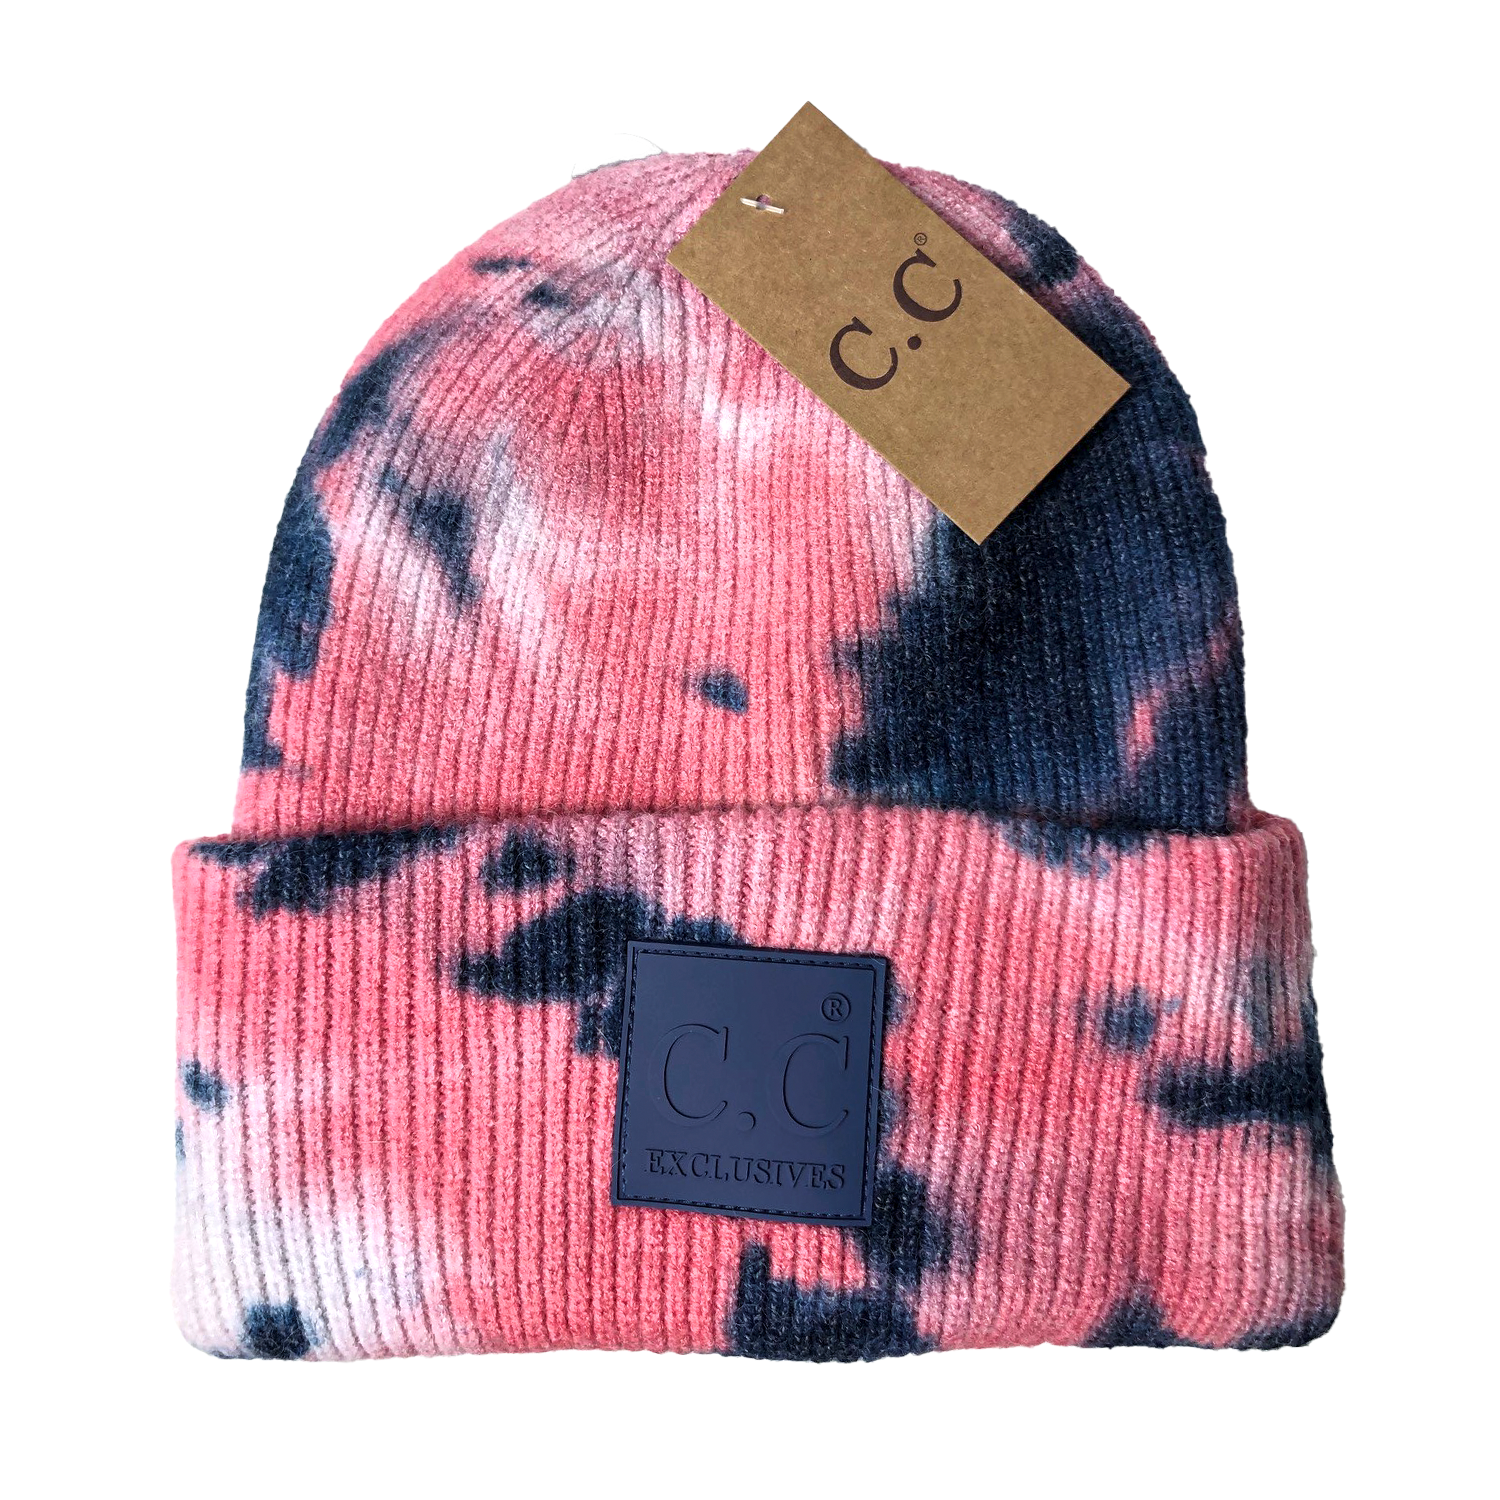 HAT-7380 Tie Dye Beanie with C.C Rubber Patch - Navy/Pink